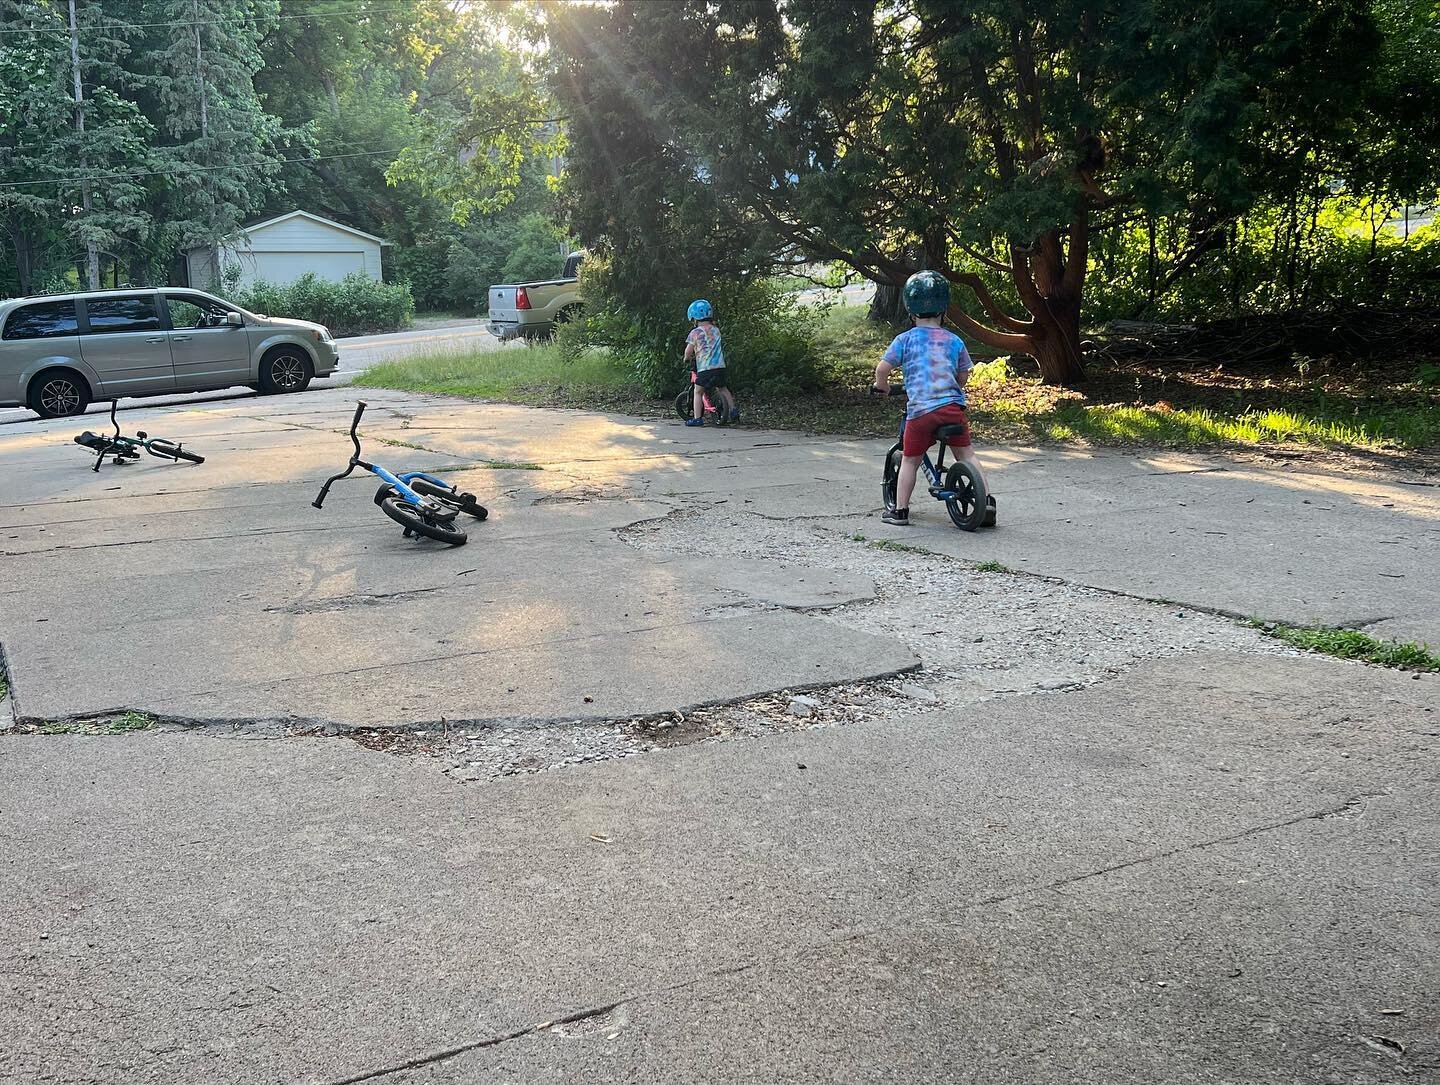 Gently trying to encourage my boys to try pedal bikes. It&rsquo;s a process. When they&rsquo;re ready, they&rsquo;re ready. One of the hardest parts of parenting I feel can be our outside pressure to do things faster. Until then, I just sit back and 